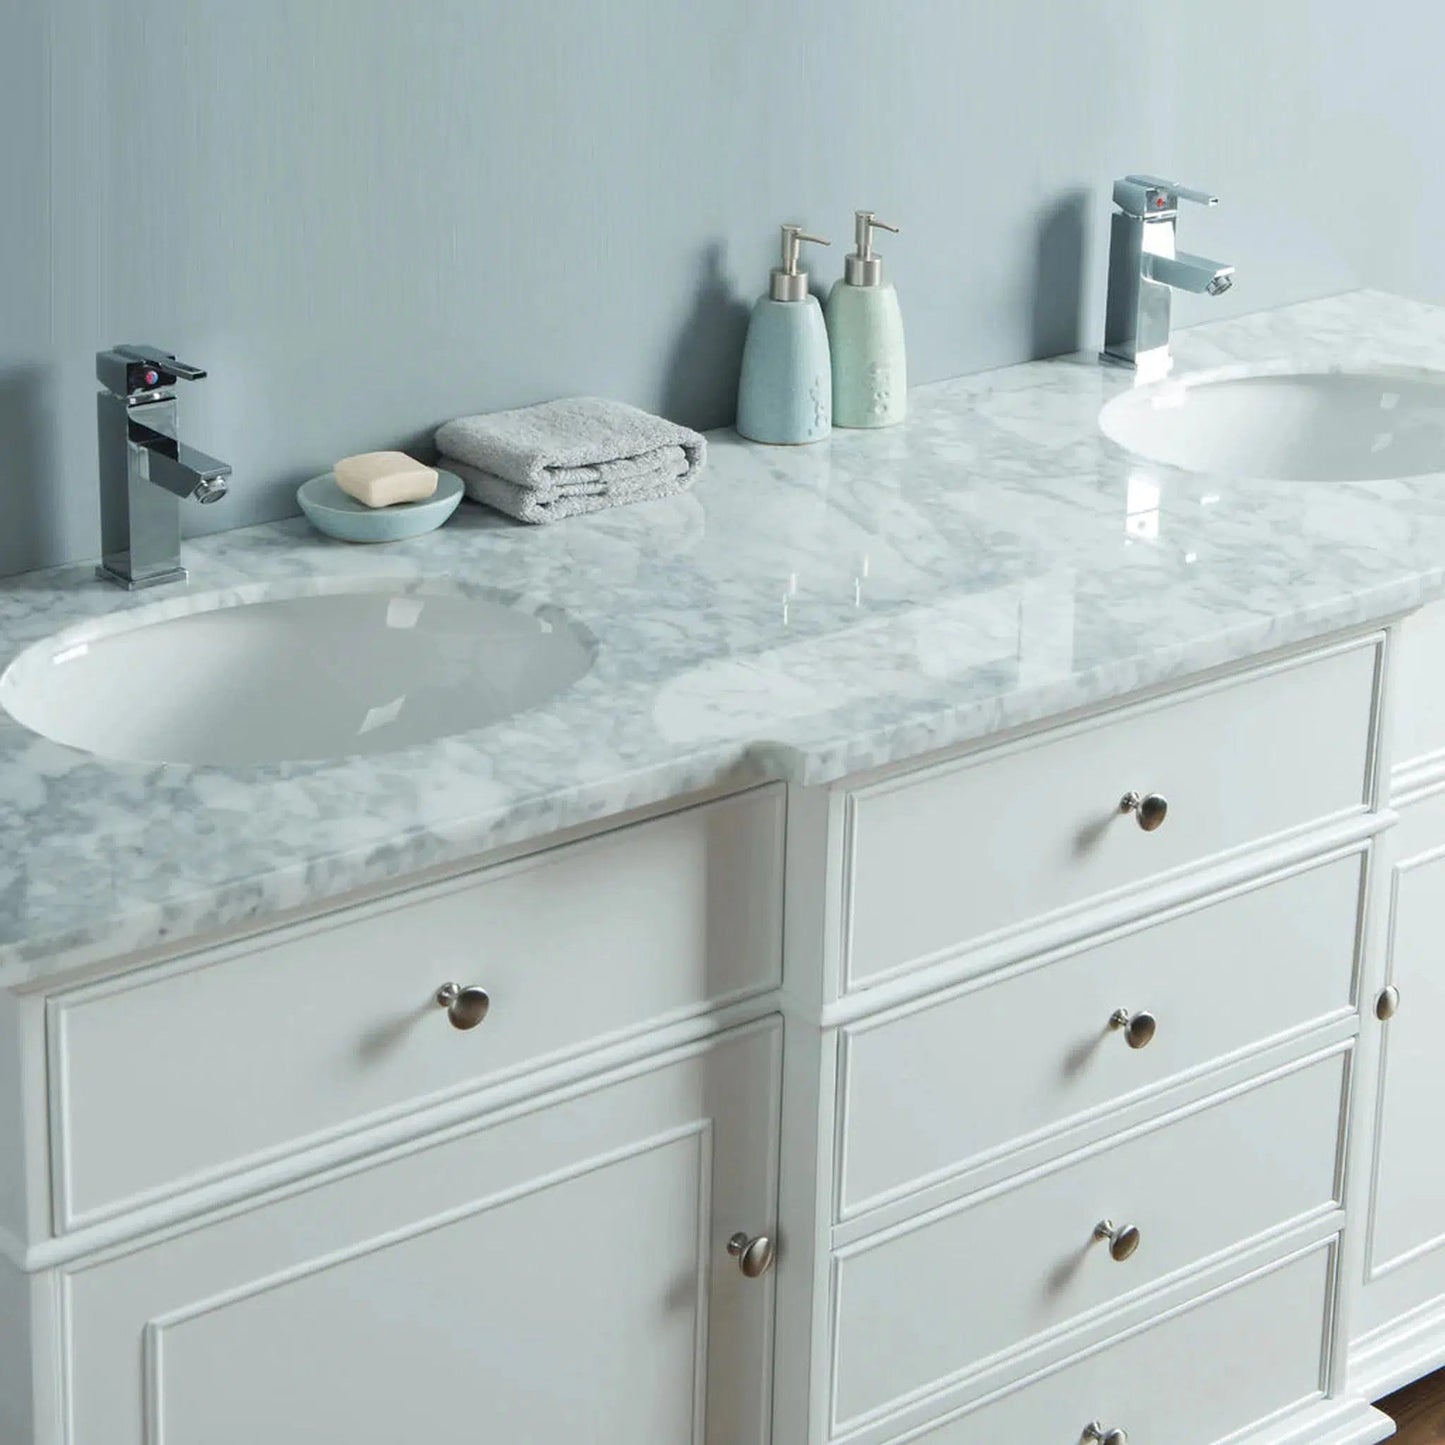 Stufurhome Cadence 60" White Freestanding Bathroom Vanity With Oval Double Sinks, 4 Drawers, 2 Doors, Carrara White Marble Top and 2 Faucet Holes